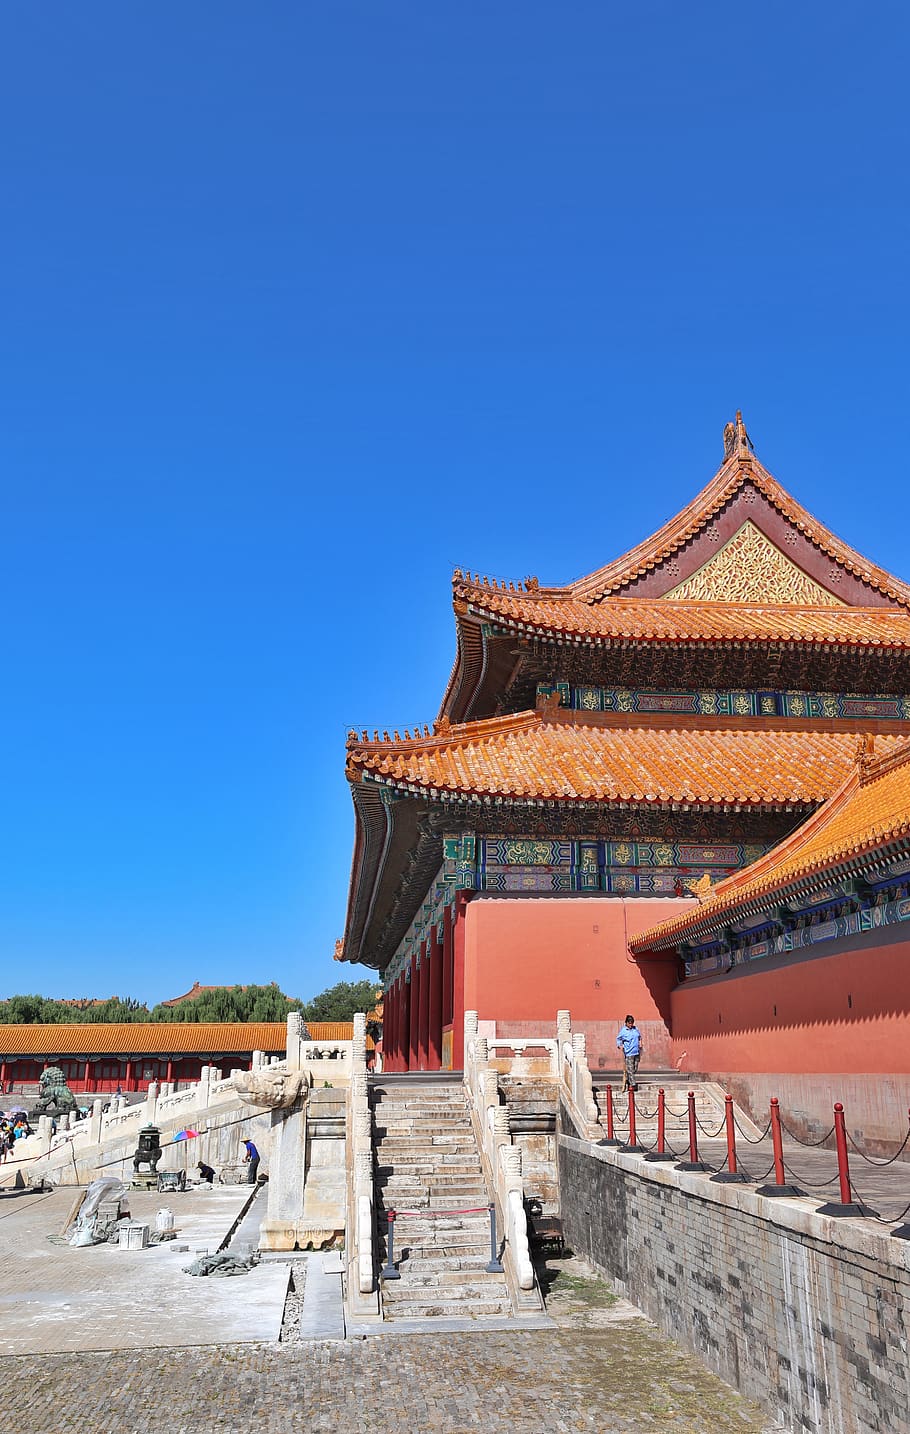 beijing, china, the national palace museum, wall, building, asia, palace, tourism, structure, architecture